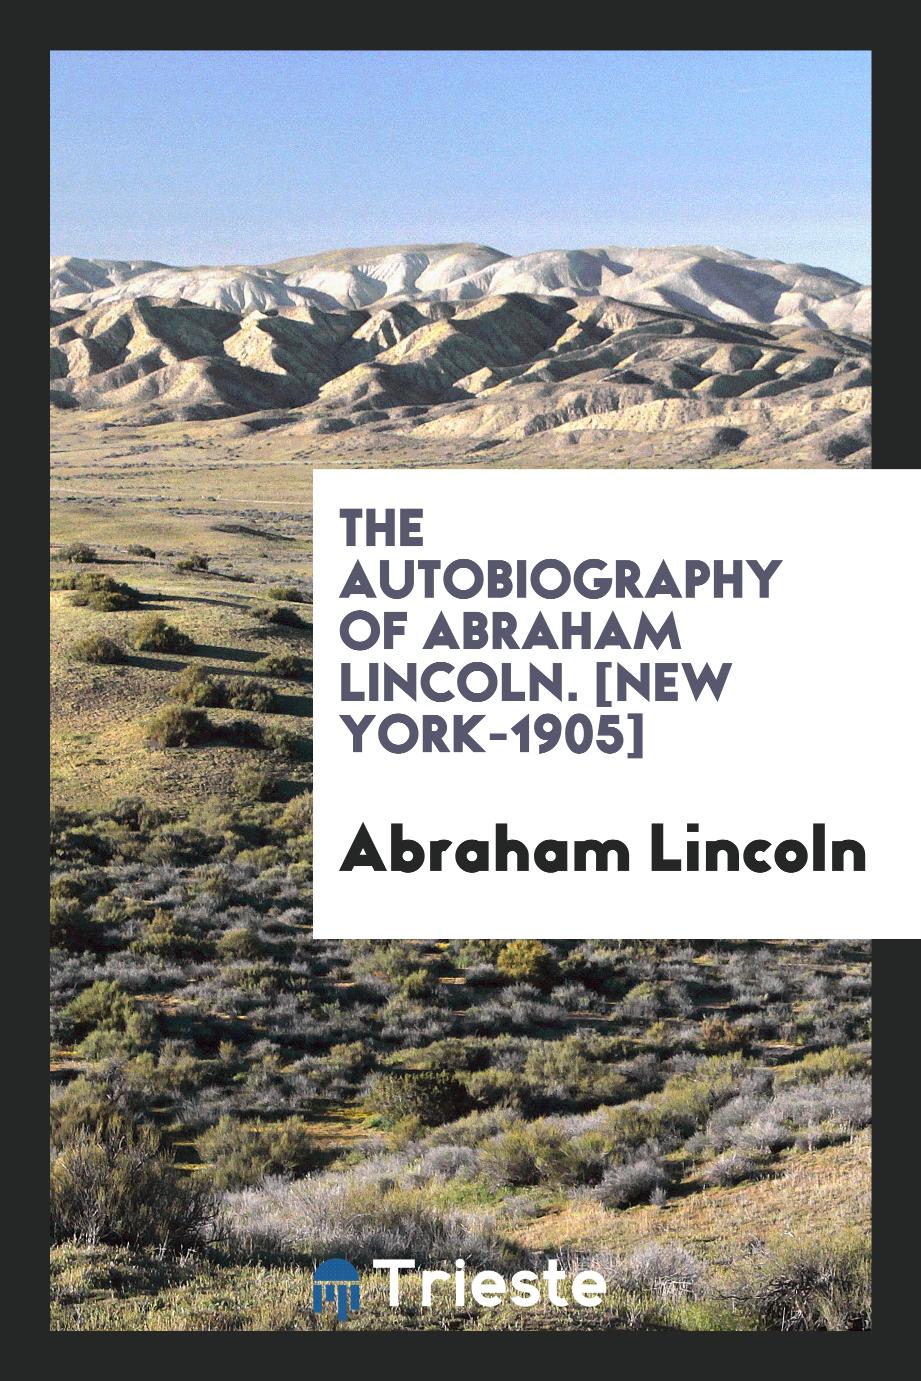 The Autobiography of Abraham Lincoln. [New York-1905]